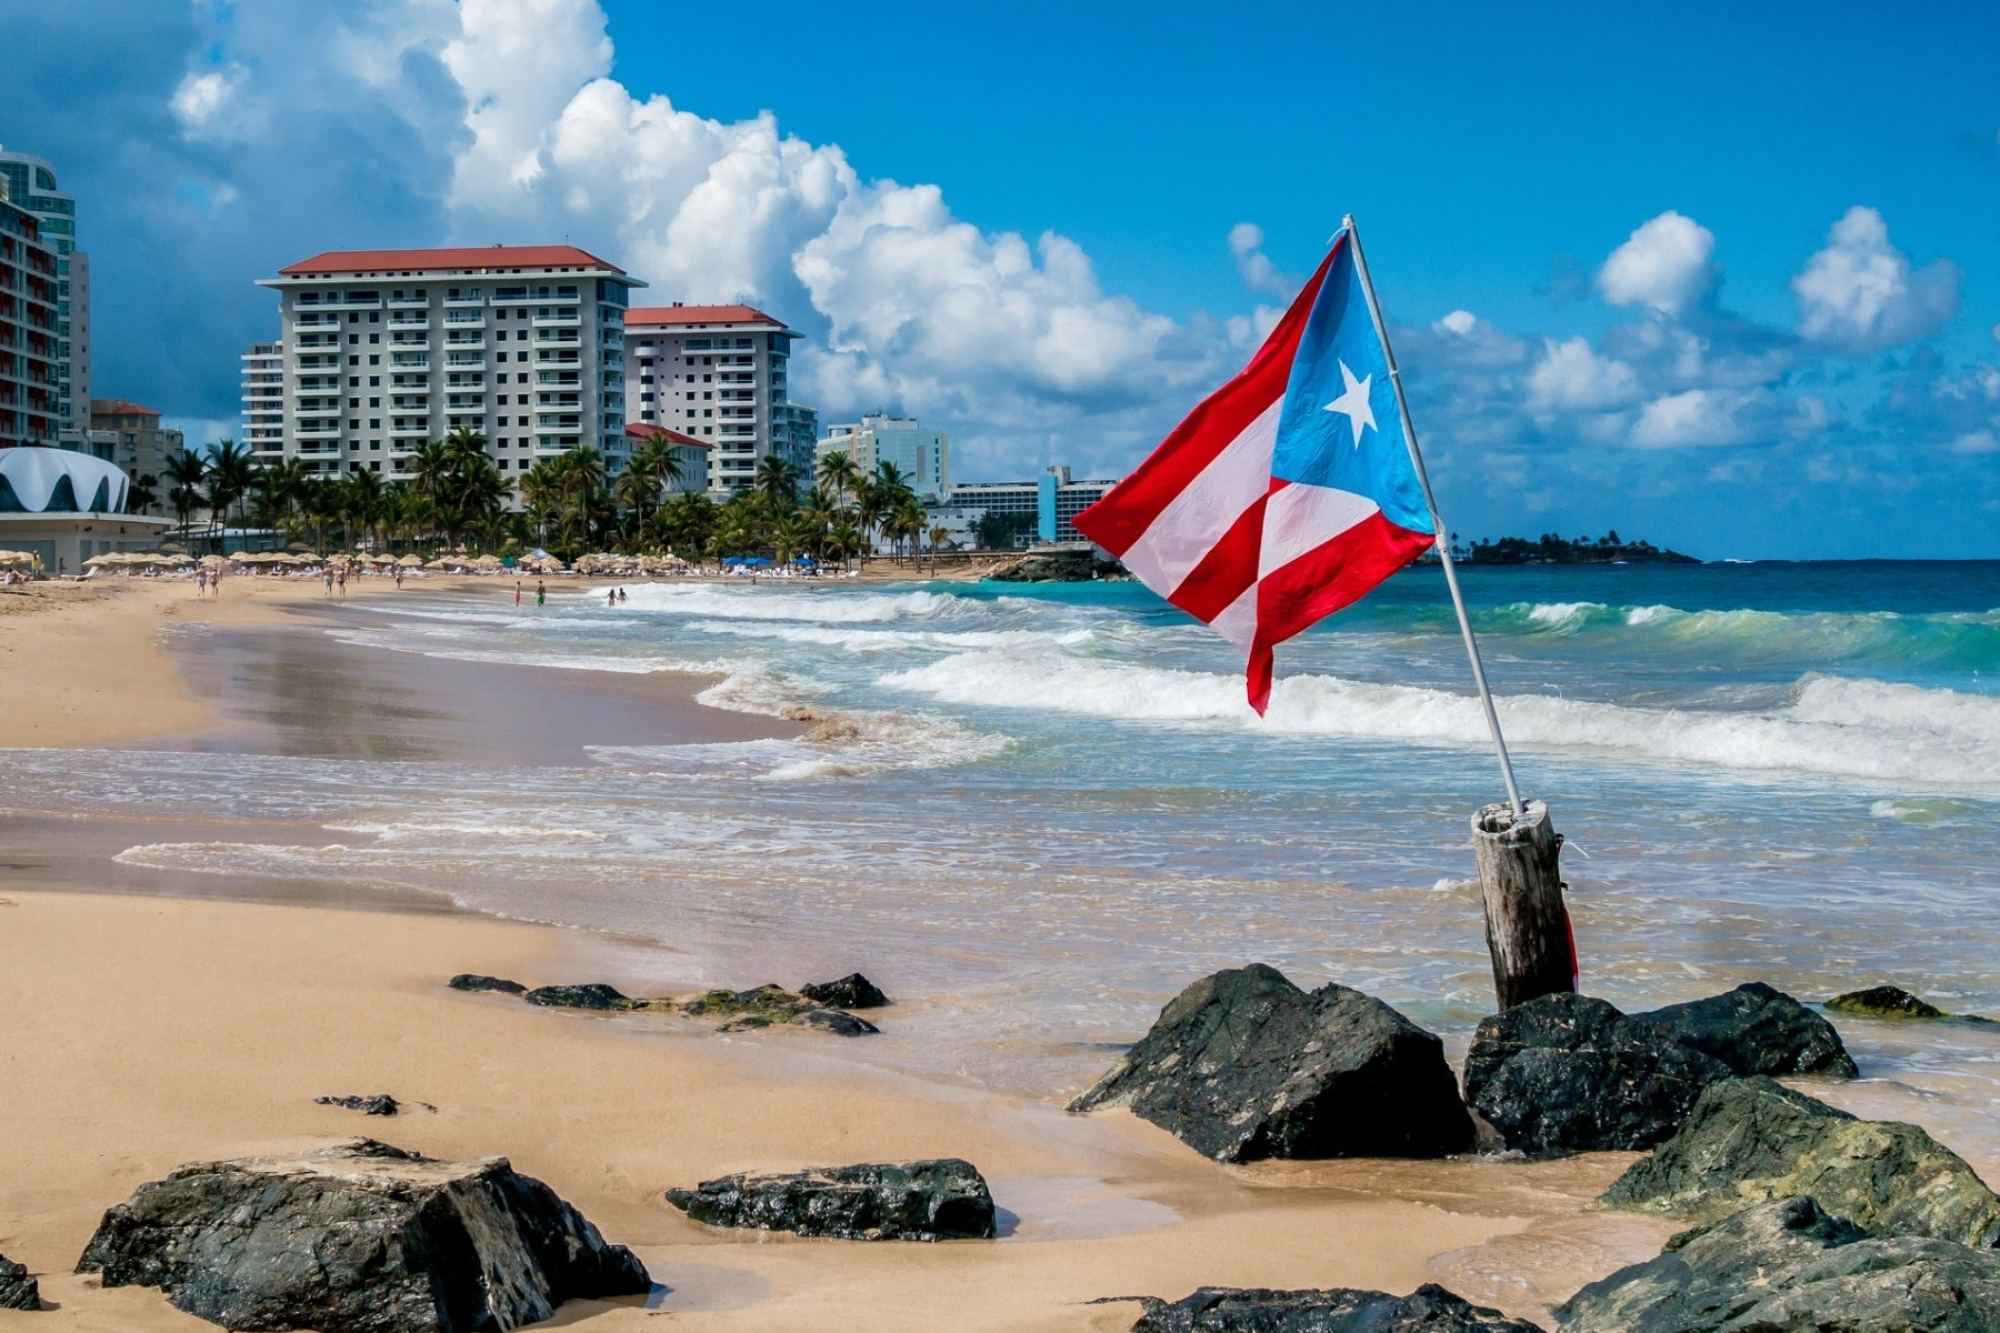 Business leaders in Puerto Rico, Thriving environment, Economic opportunities, Growth potential, 2000x1340 HD Desktop